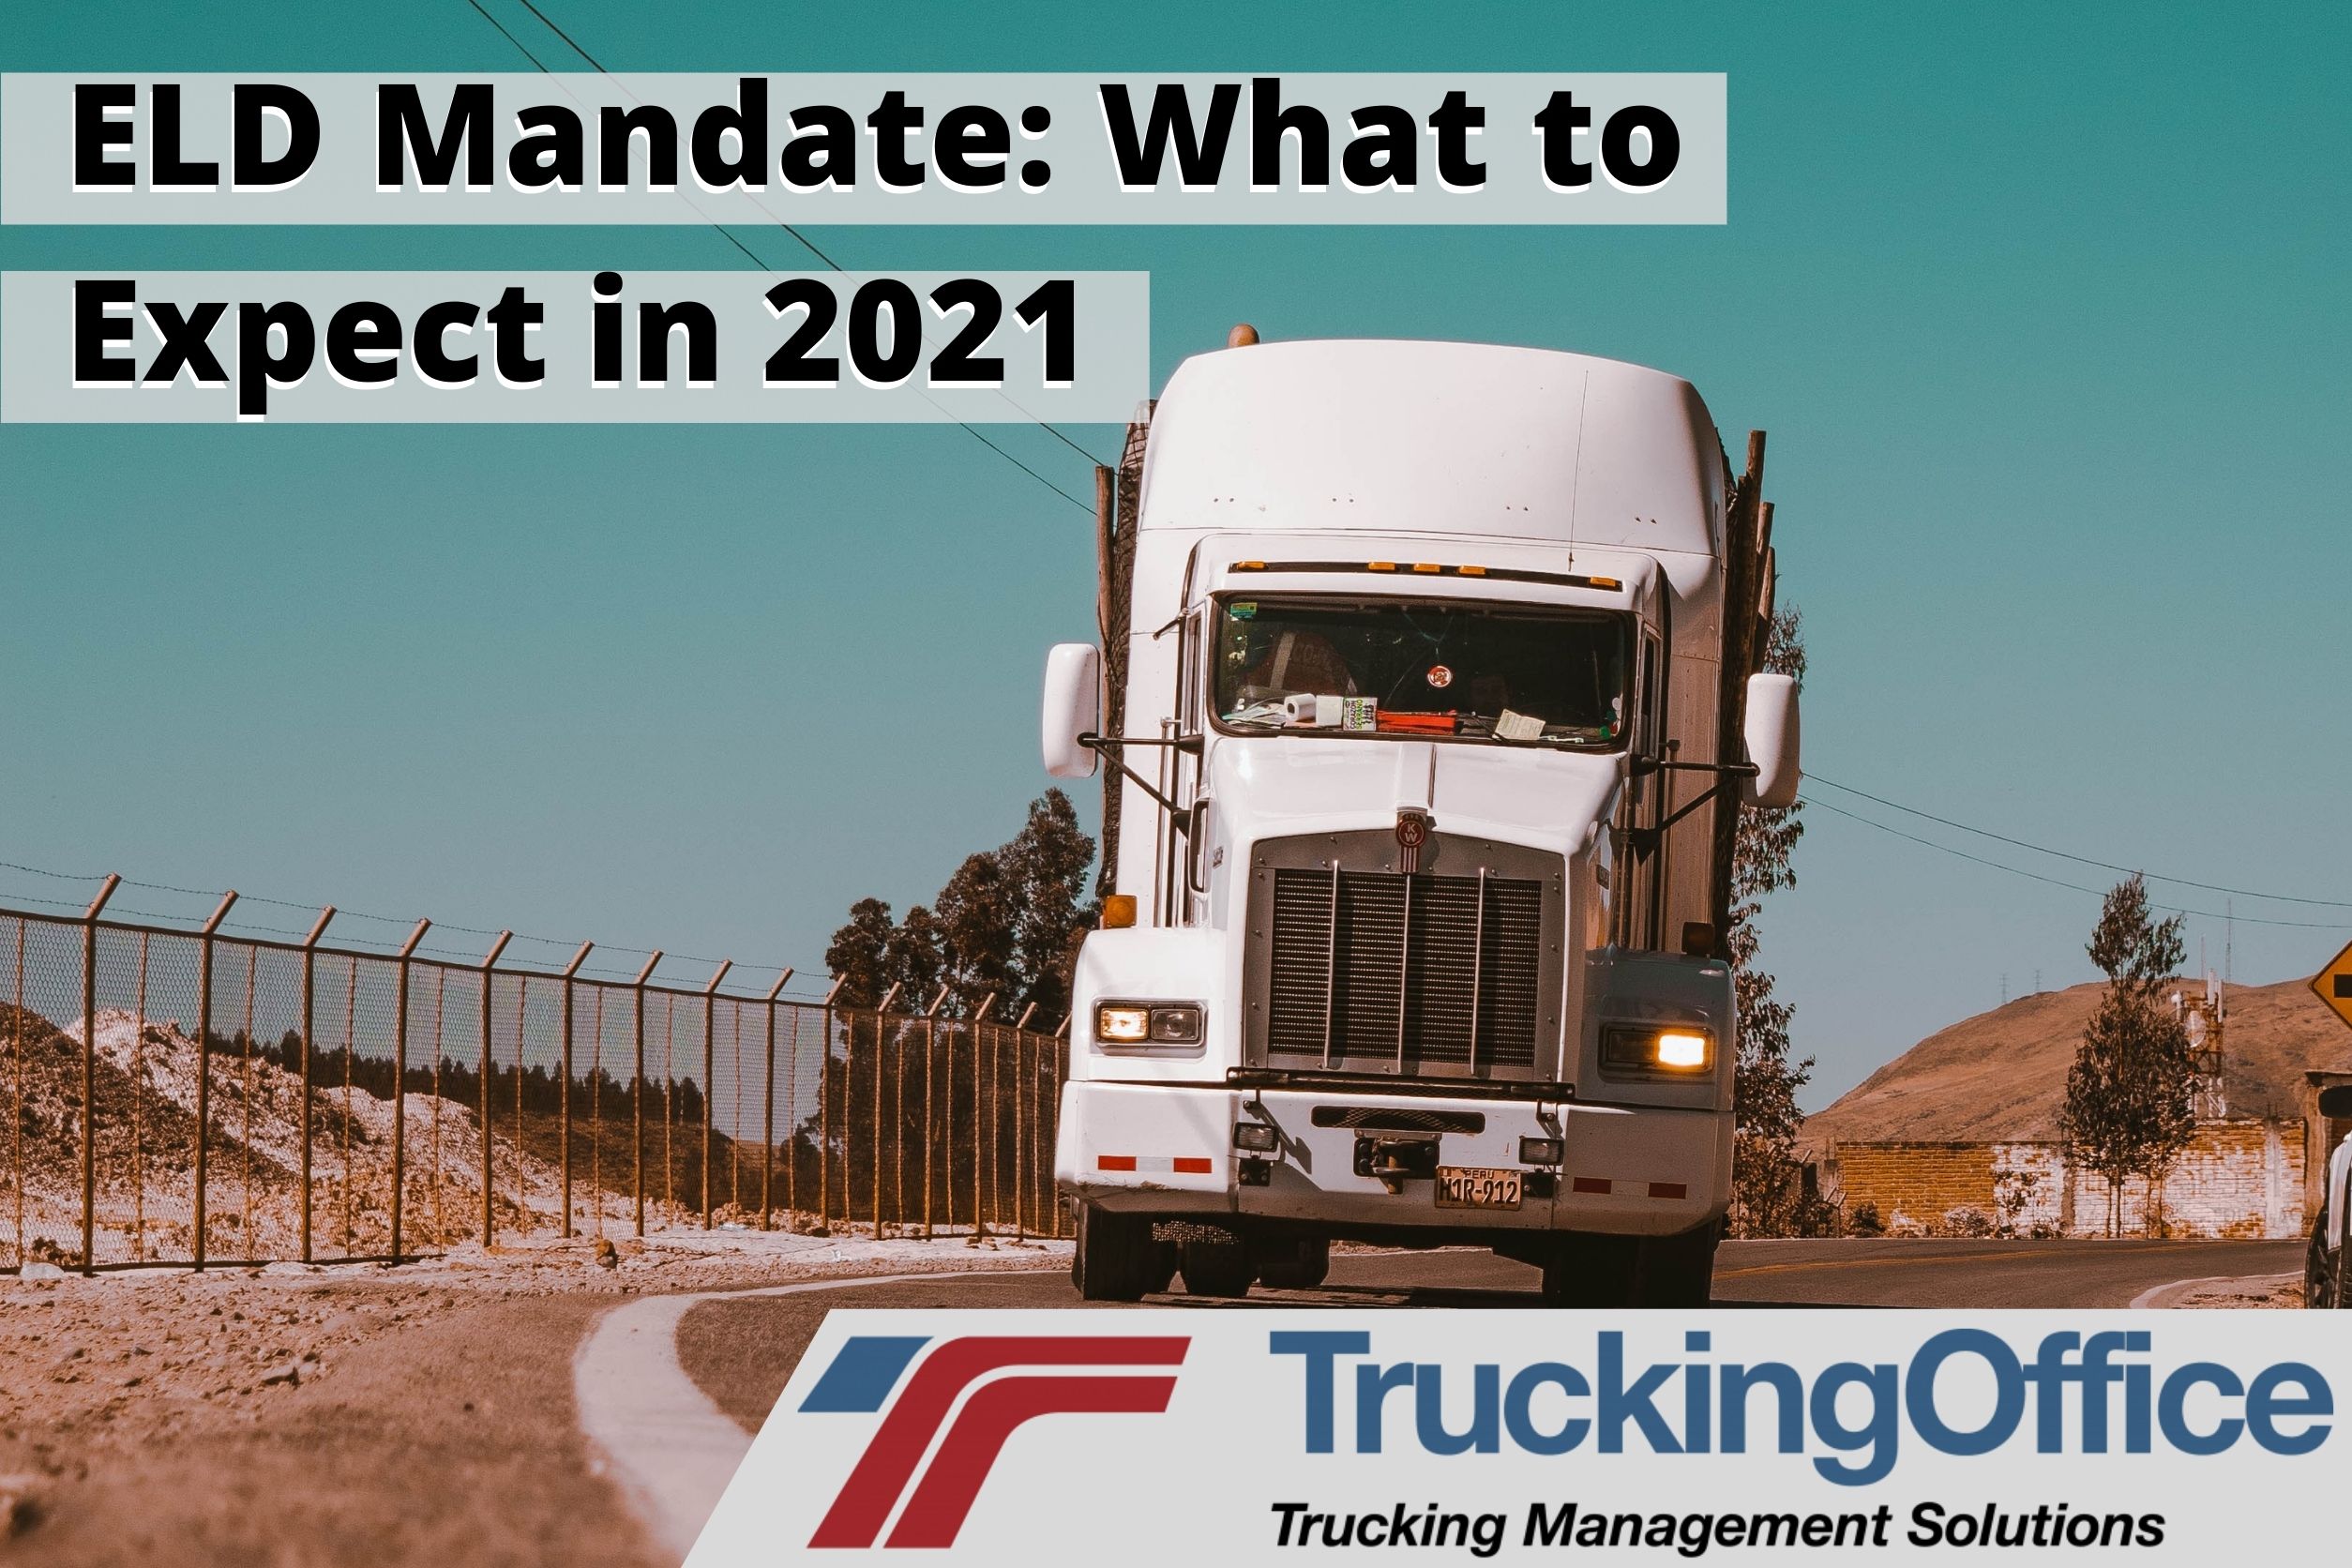 Do you need a CDL or an ELD?